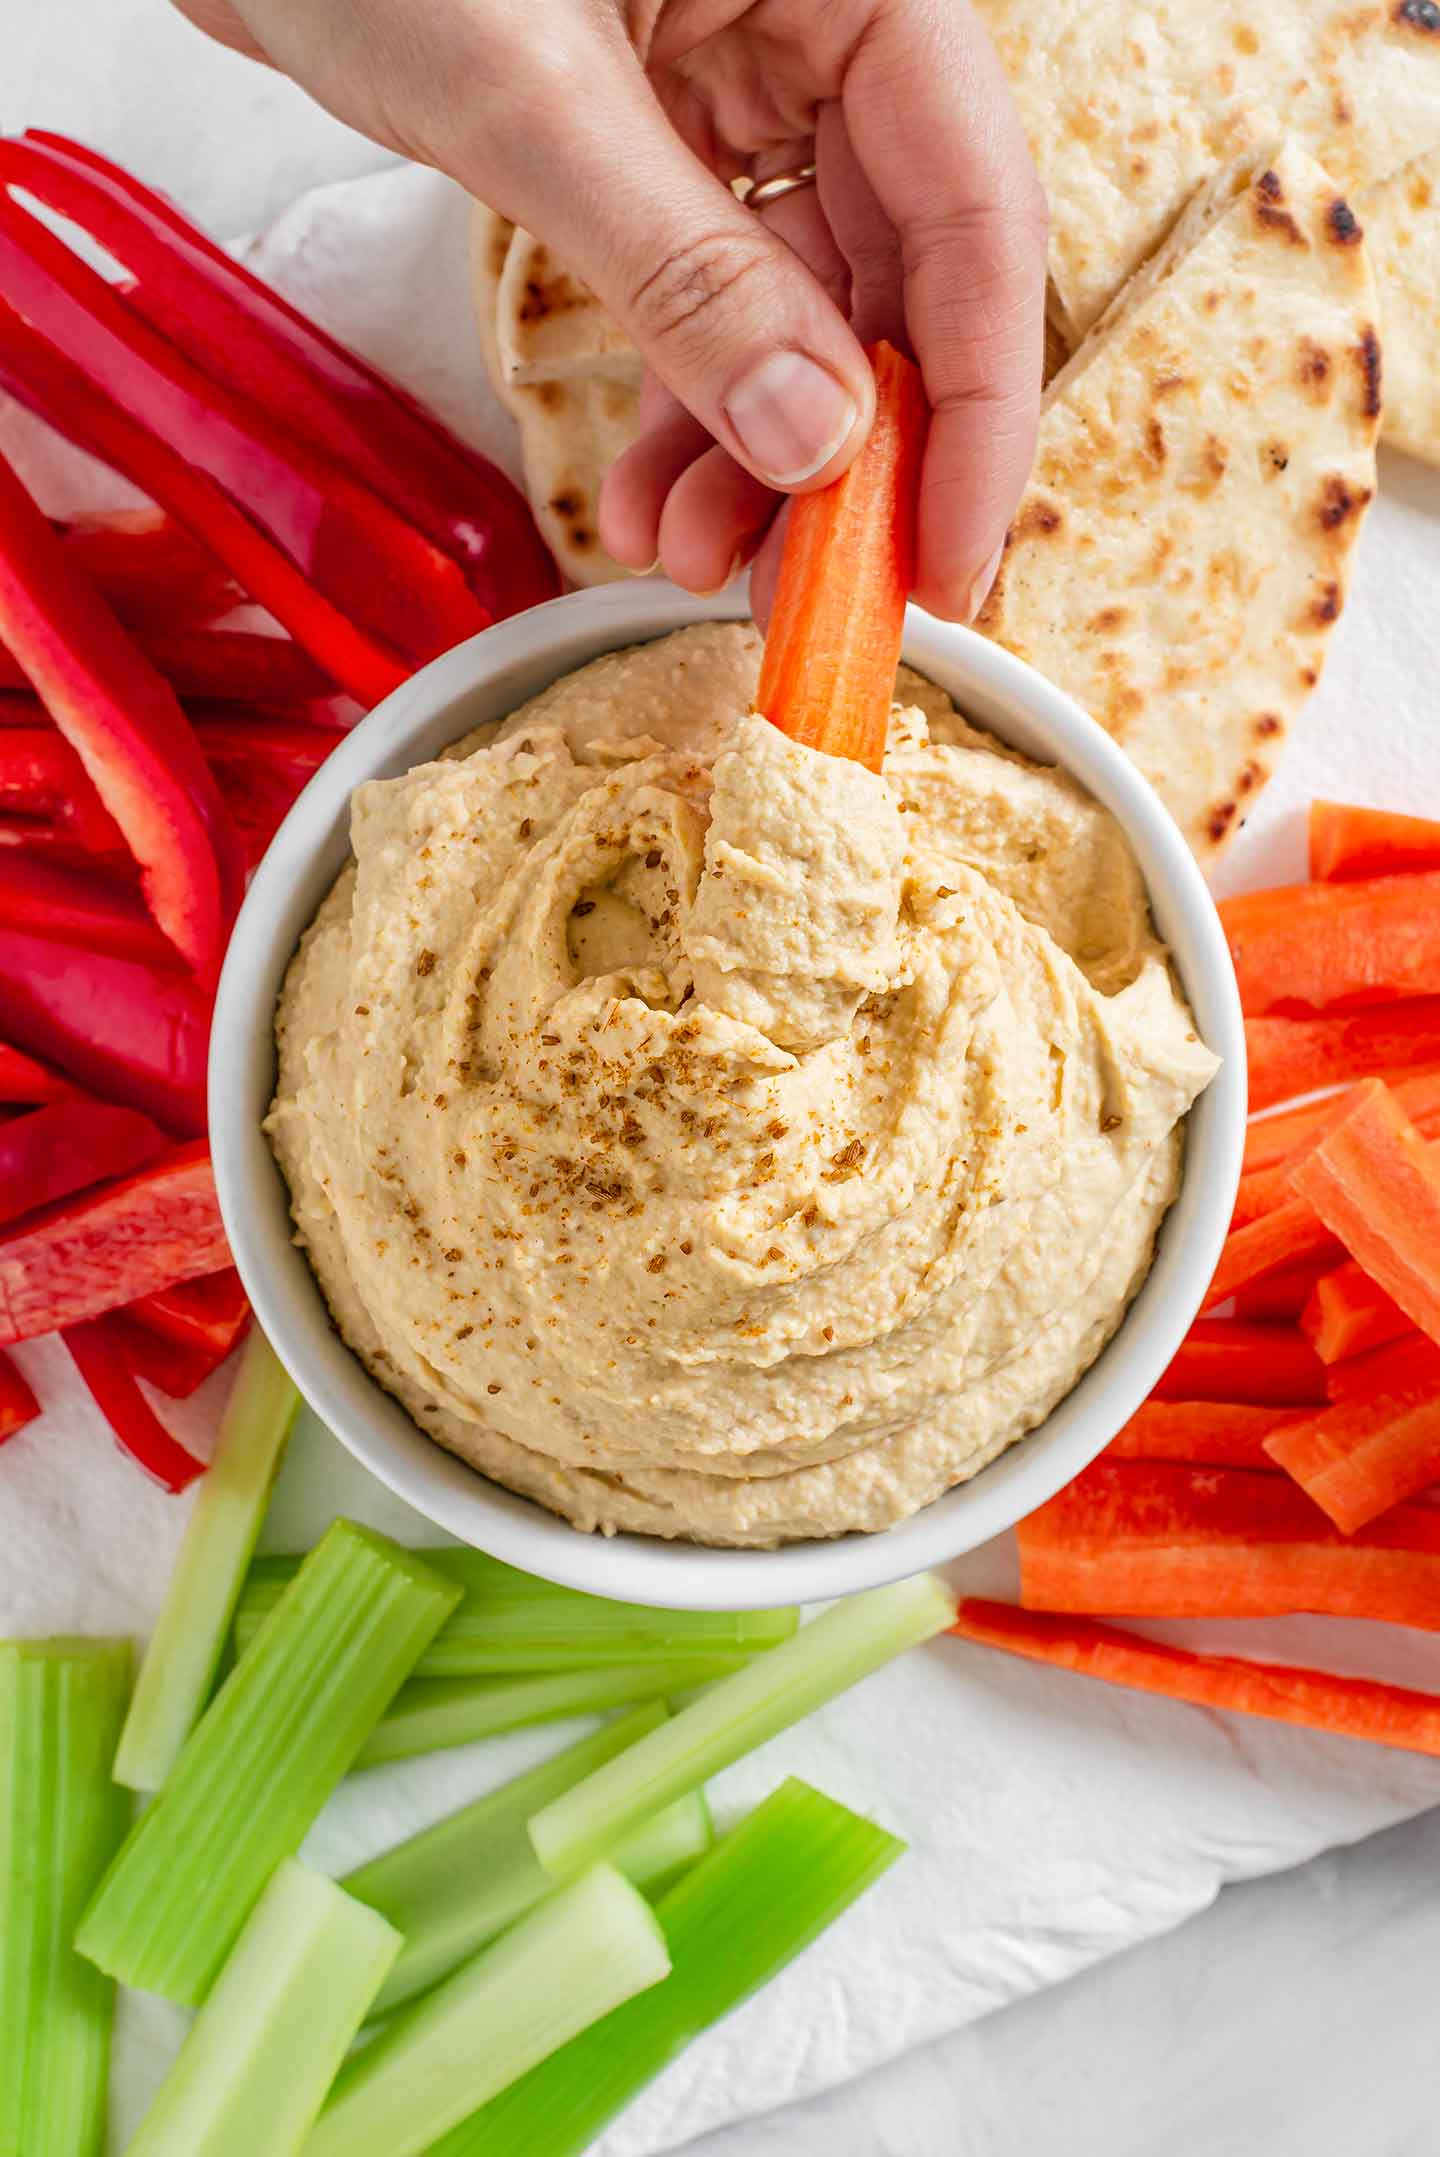 5 Minute Creamy Hummus I'm Never Without • Tasty Thrifty Timely